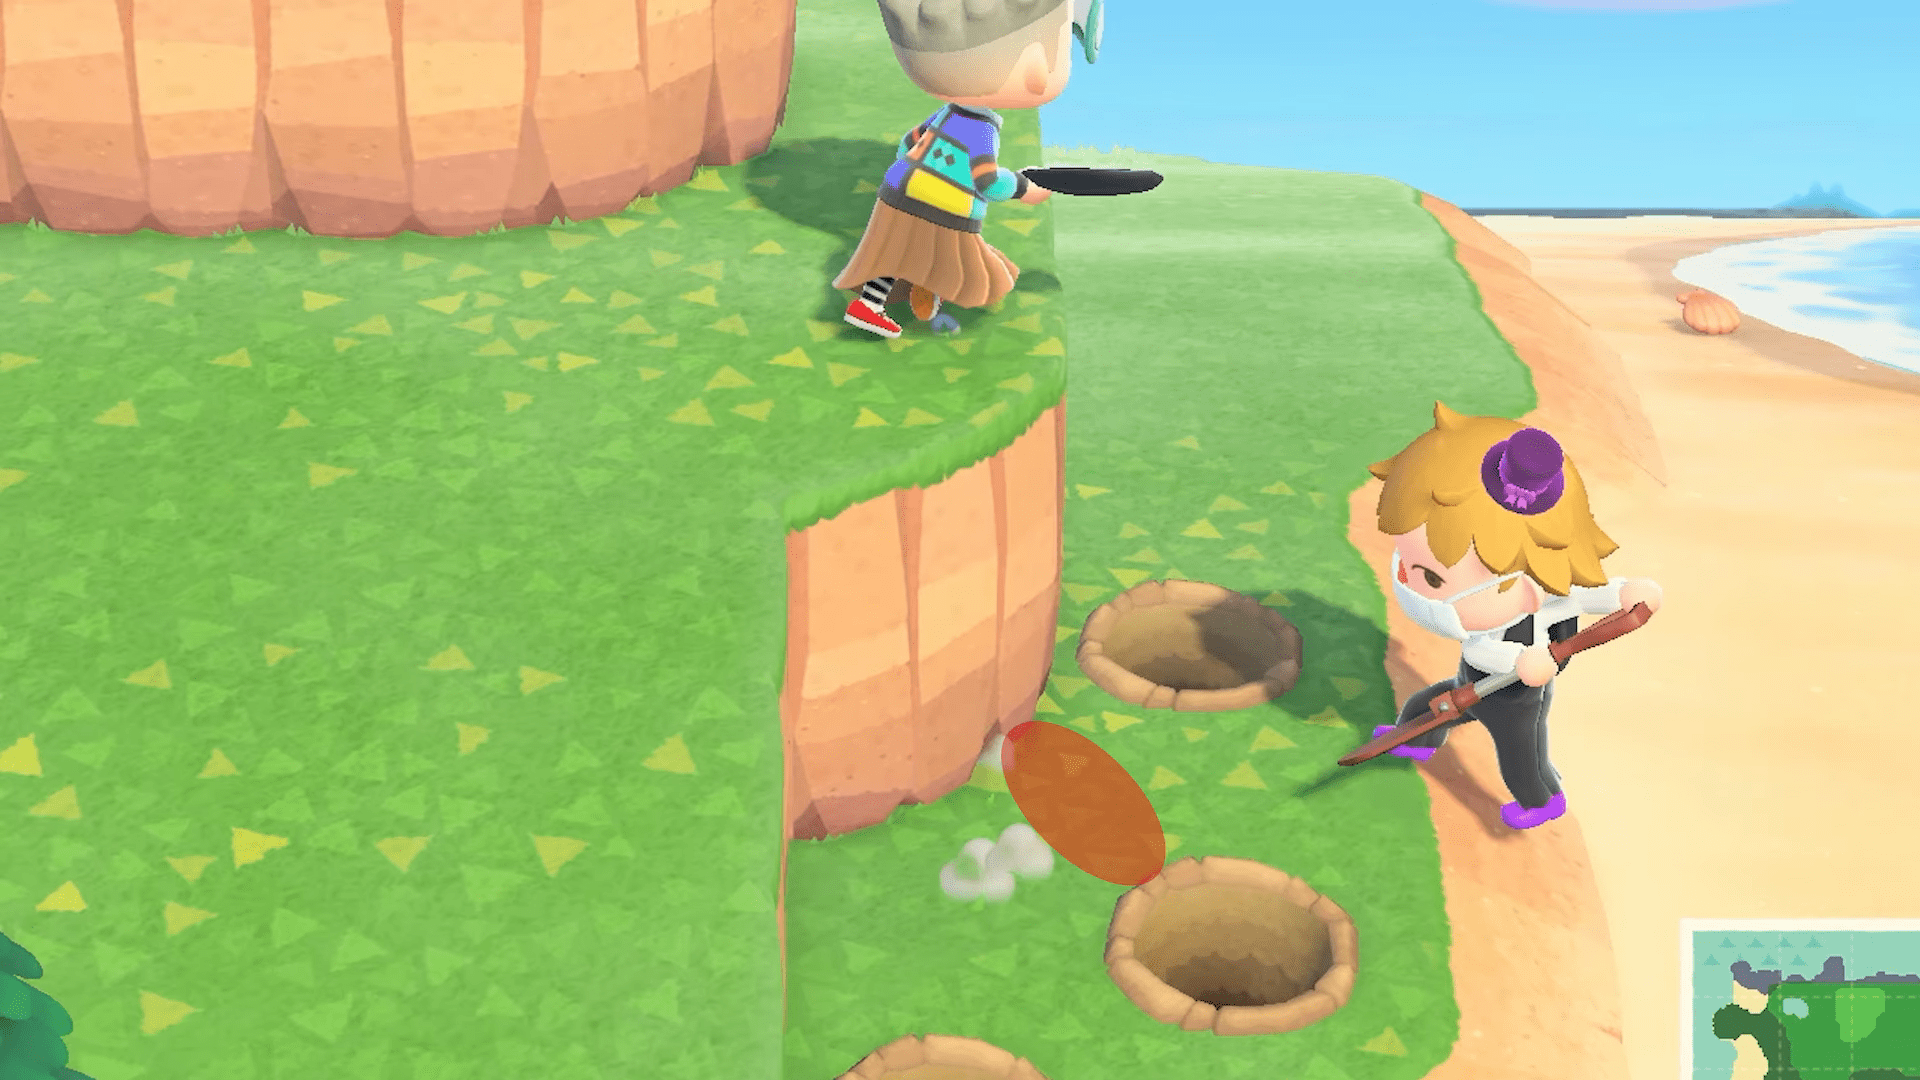 Animal Crossing: New Horizons Update 1.2.1 Fixes Various Item Duplication Glitches And Teleportation Bug